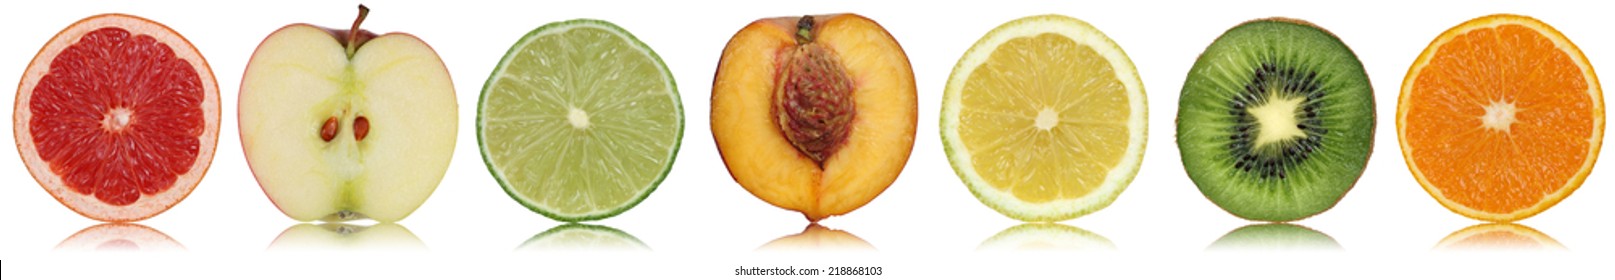 isolated fresh fruits - Shutterstock ID 218868103